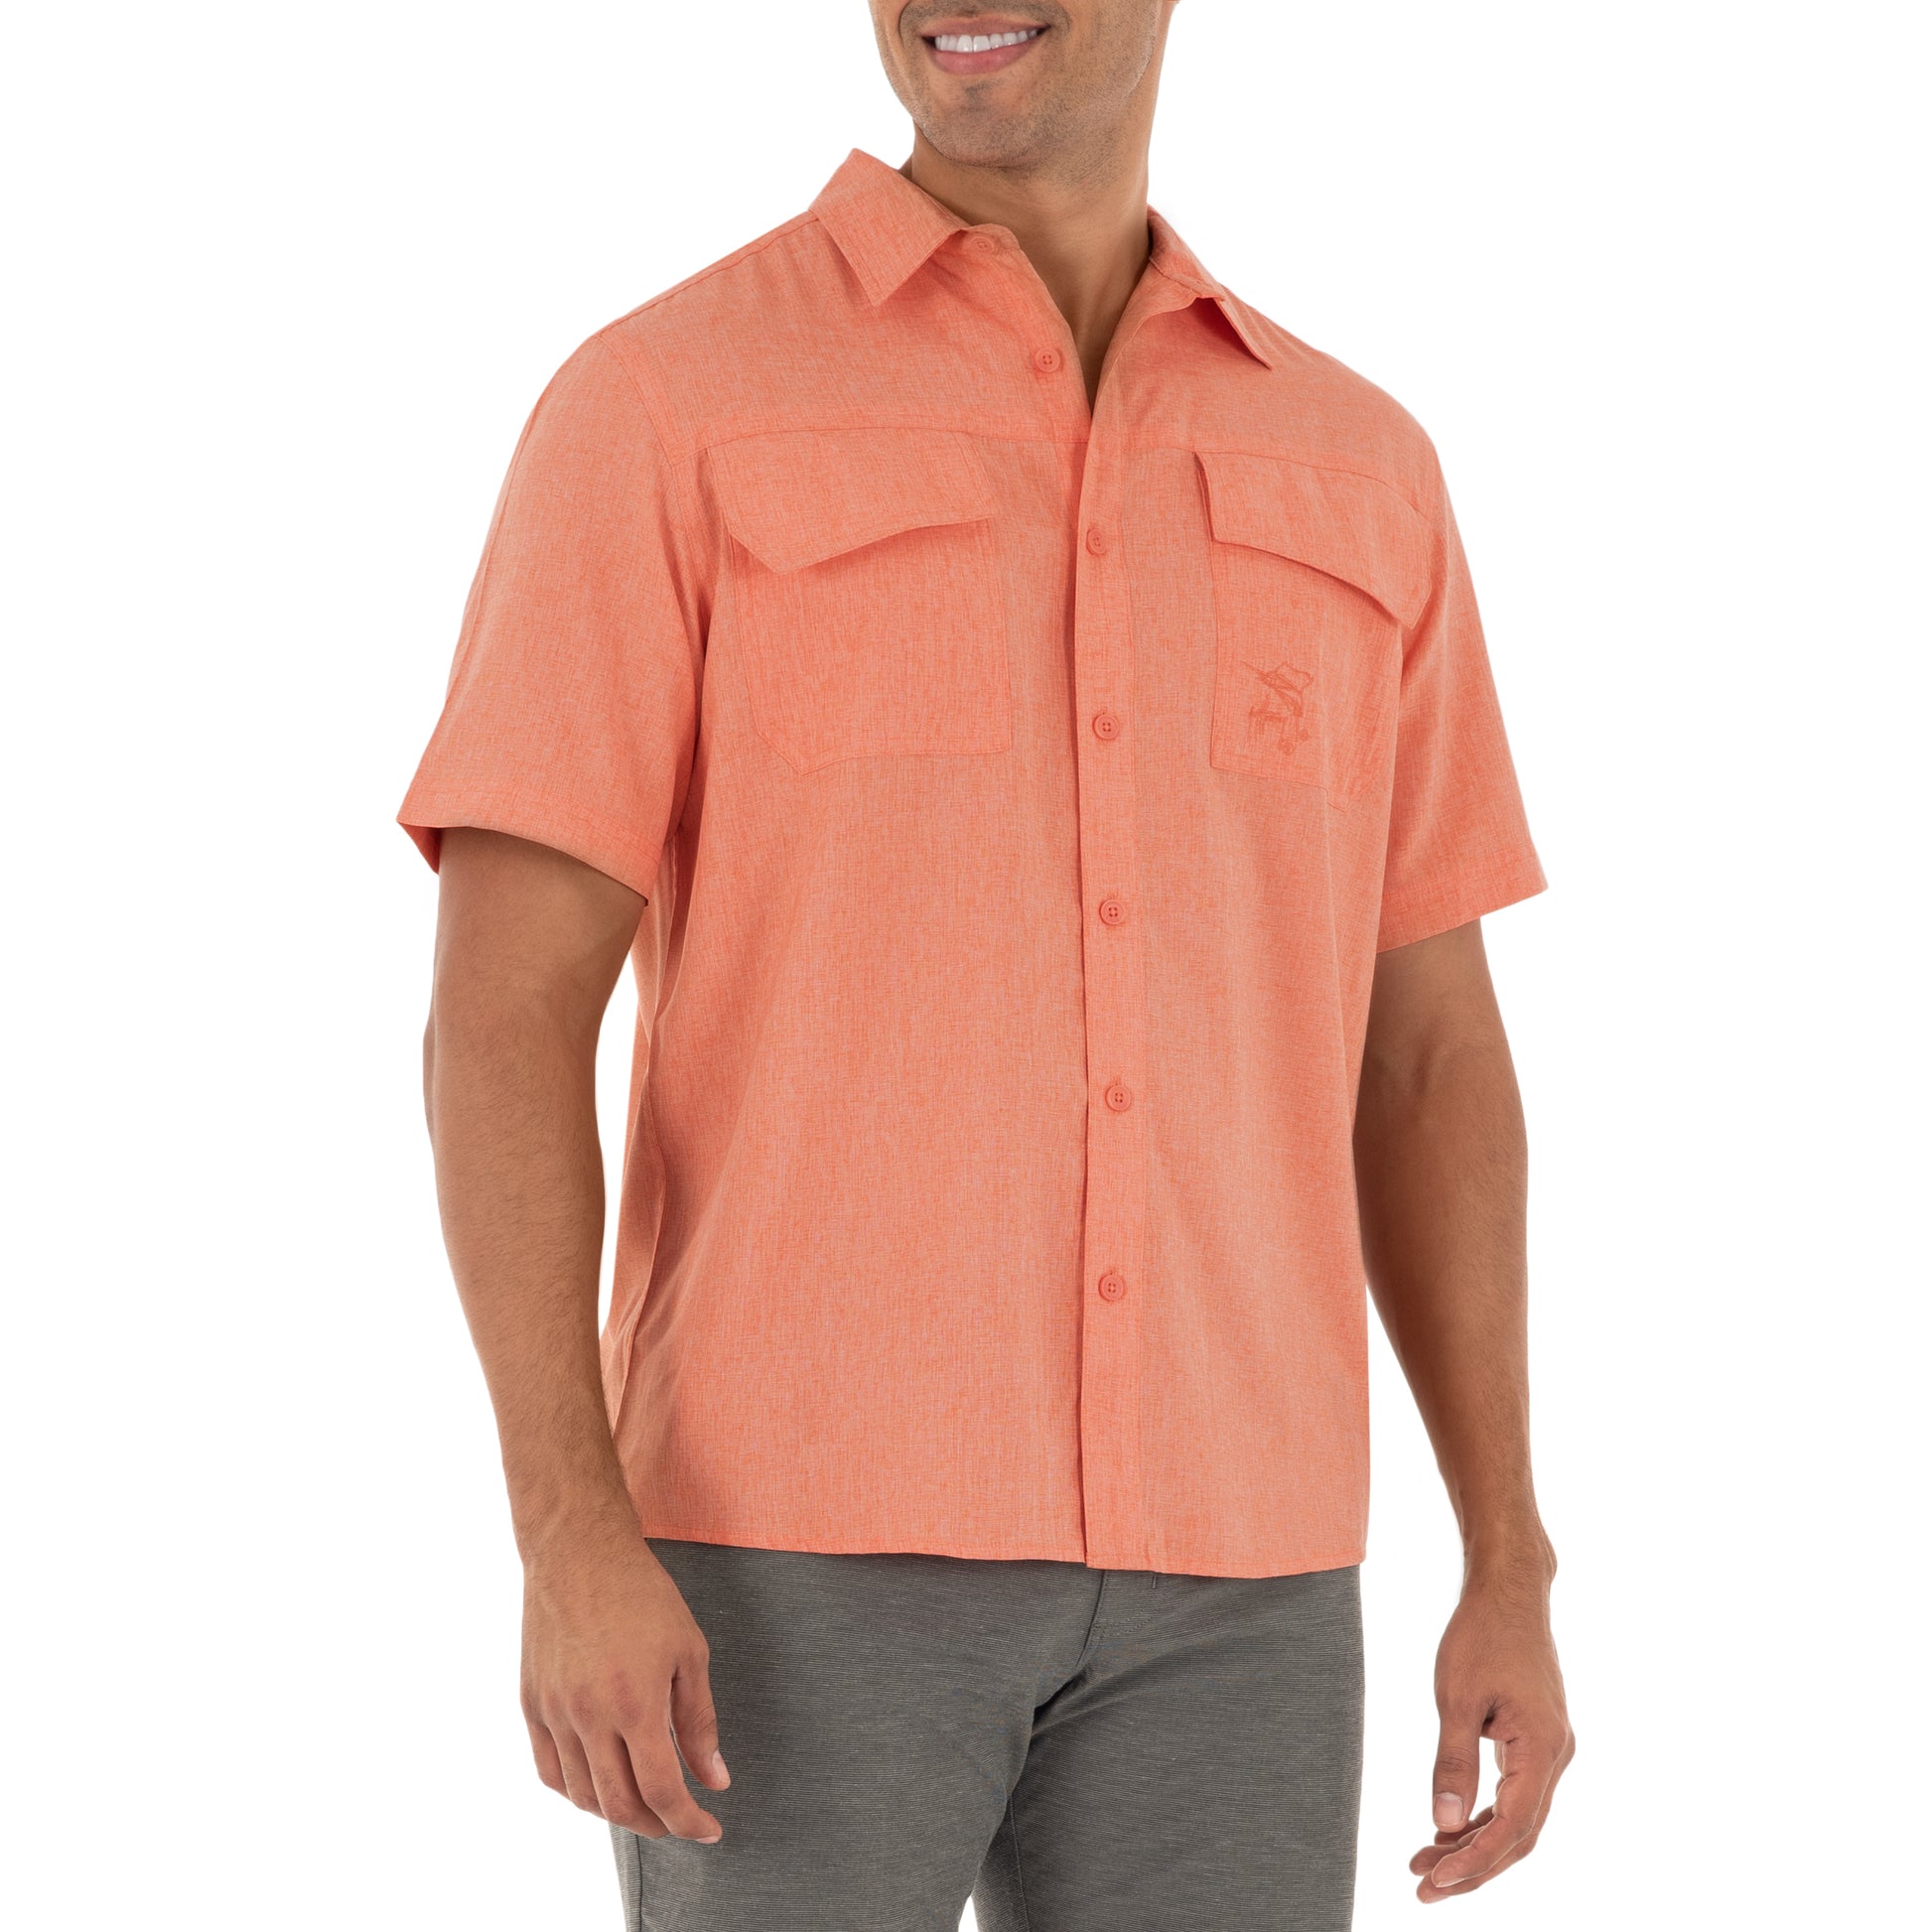 Men's Short Sleeve Heather Textured Cationic Coral Fishing Shirt View 3